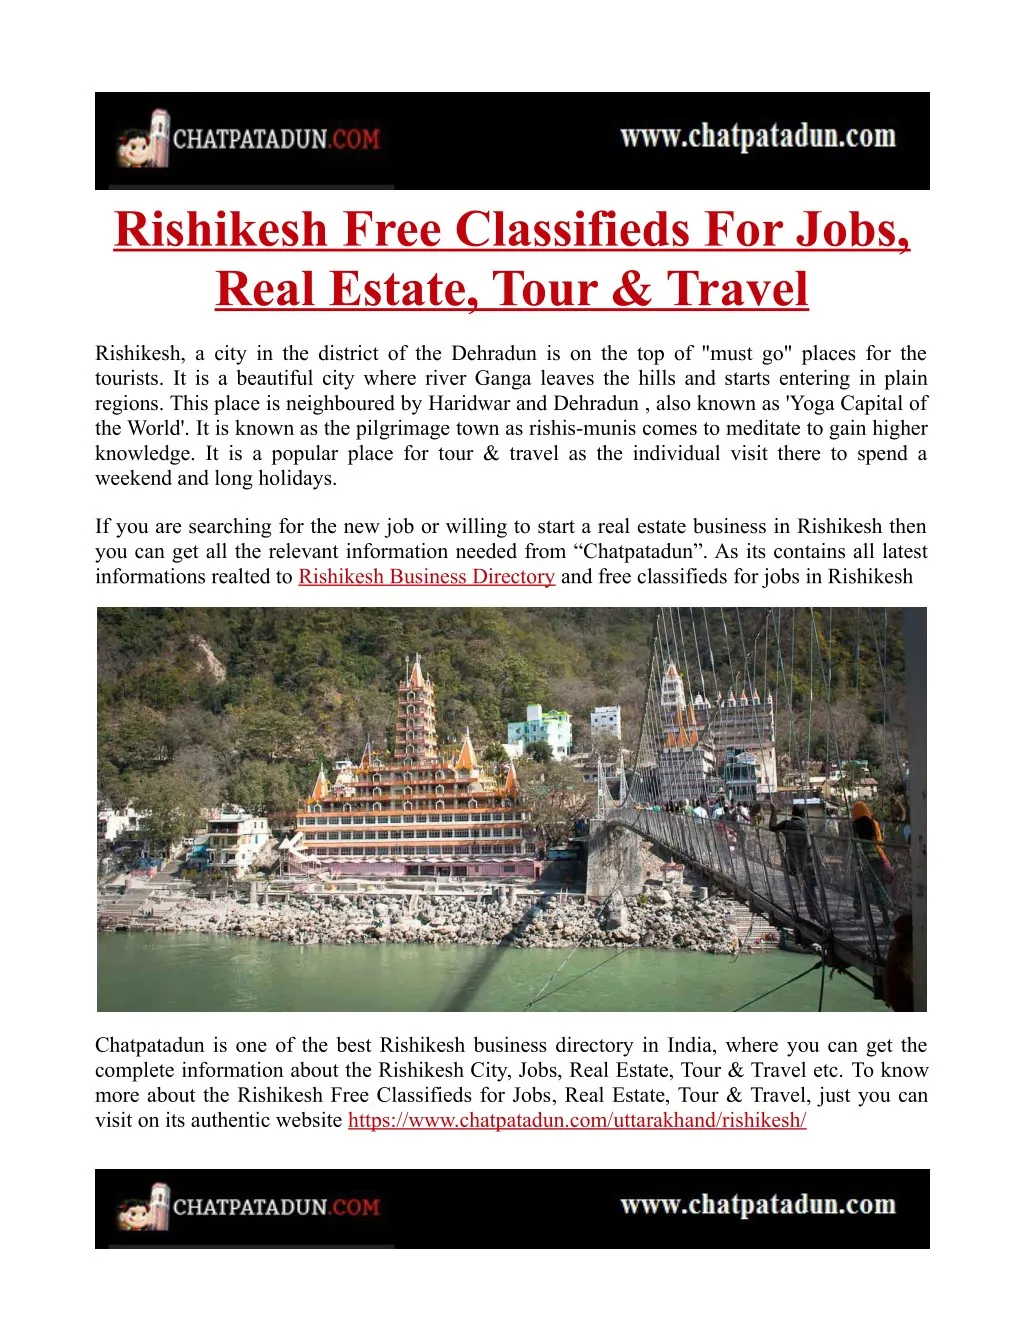 rishikesh free classifieds for jobs real estate